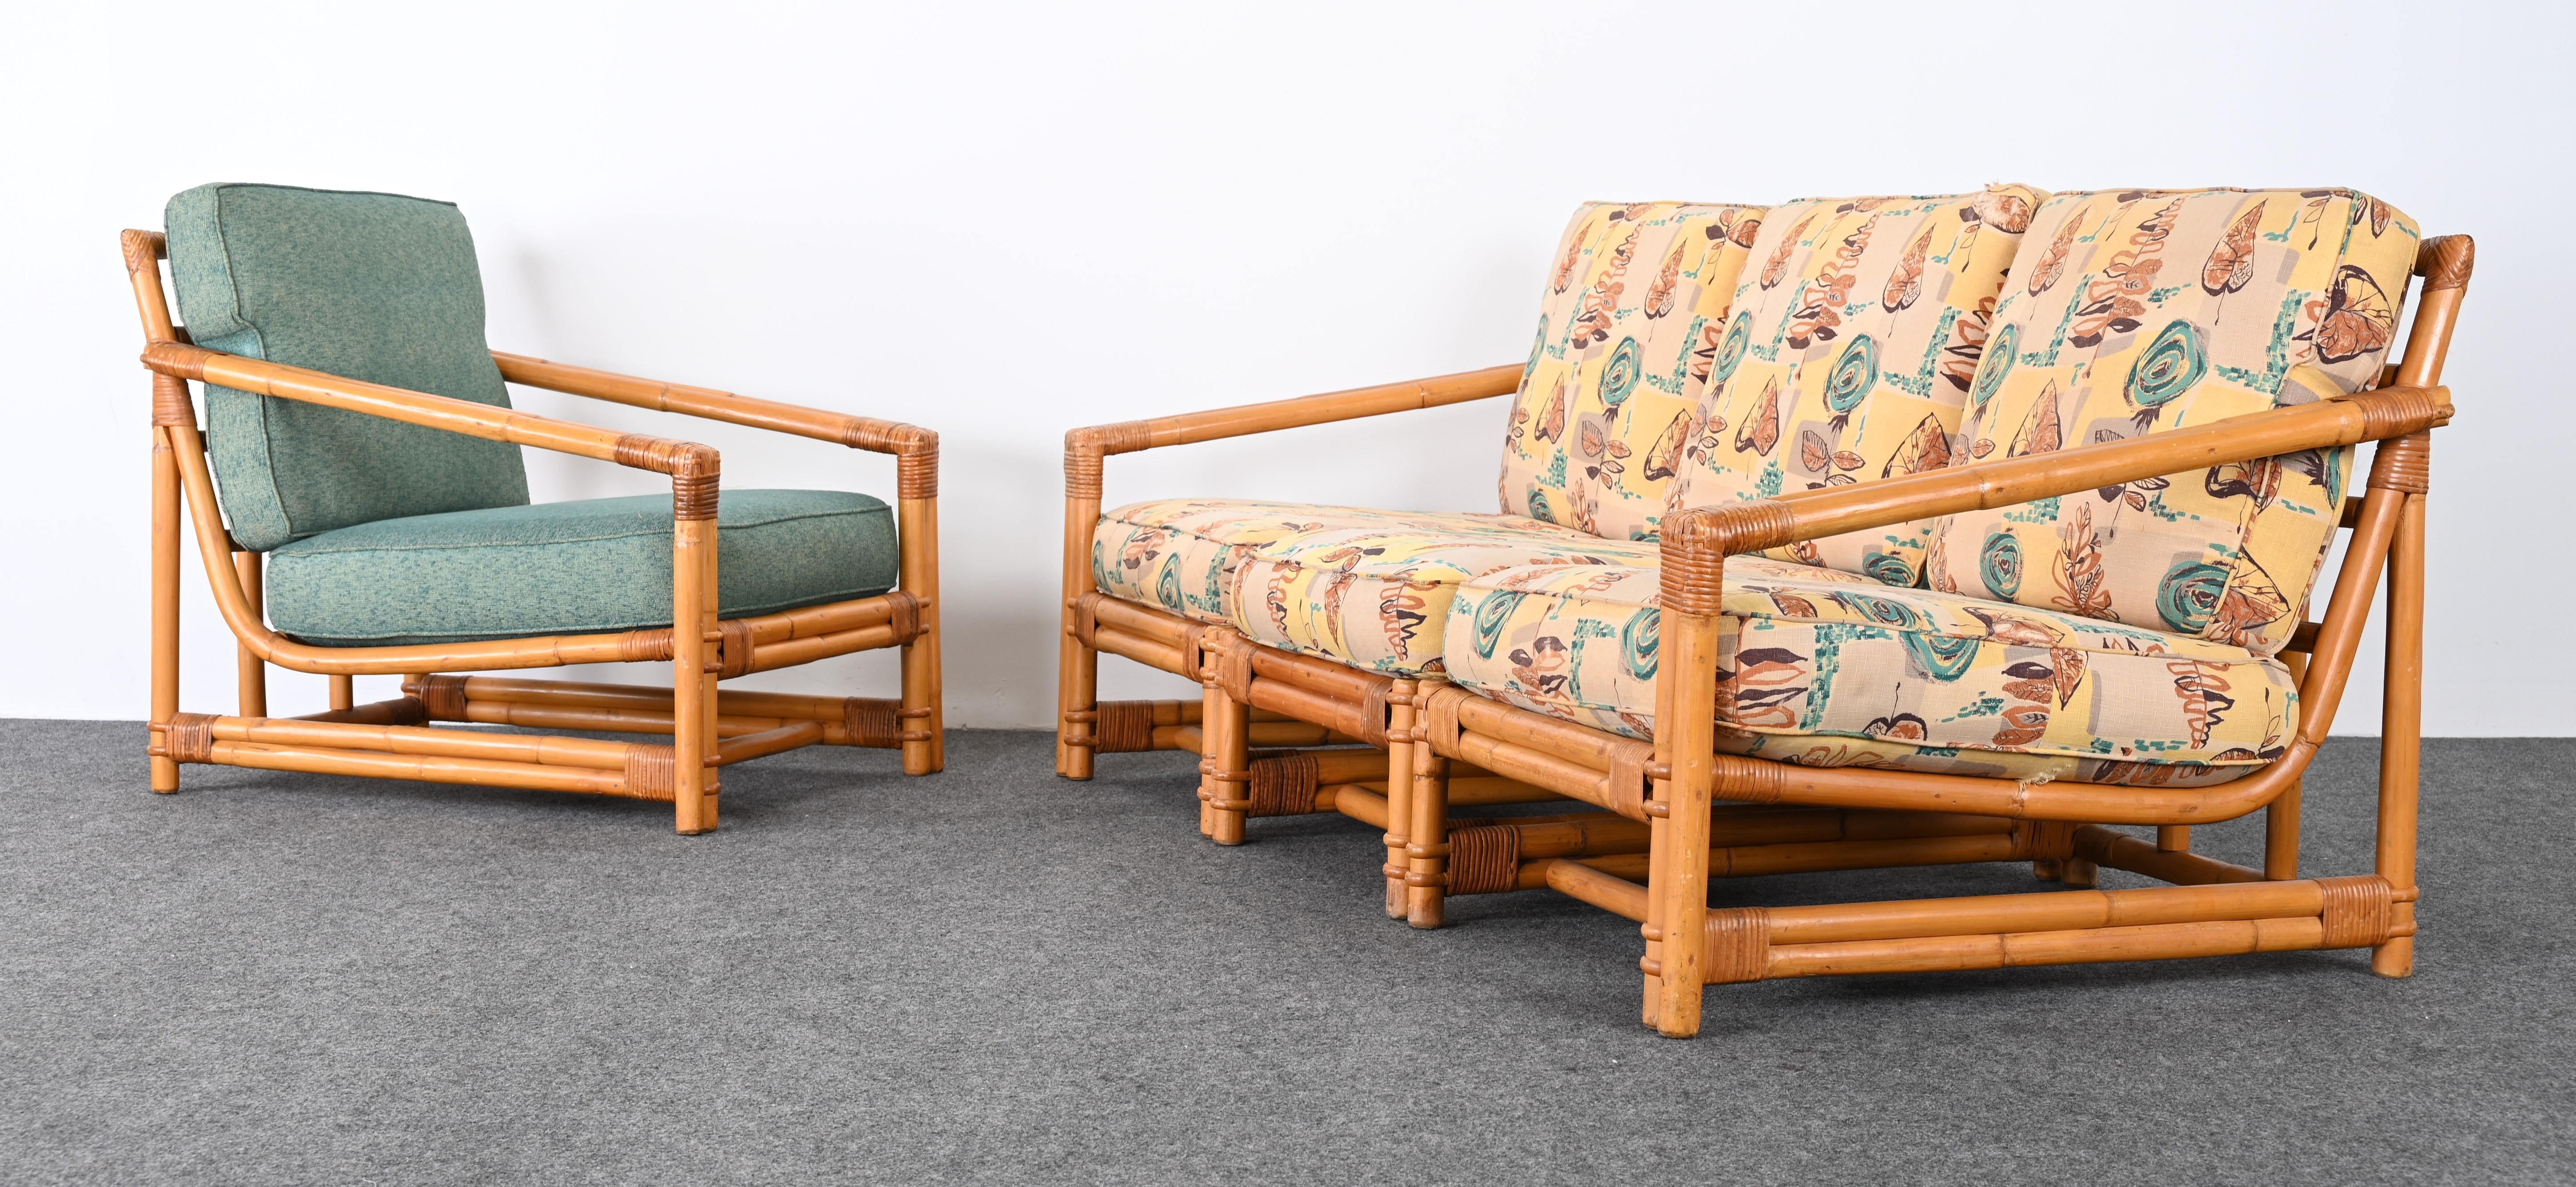 A Mid-Century Modern Rattan sofa and armchair. This set would look great on a covered sun porch or sunroom. The chair and sofa would work well in a beach house or lake house. Also would work well in a Mid Century Modern home or interior and has the